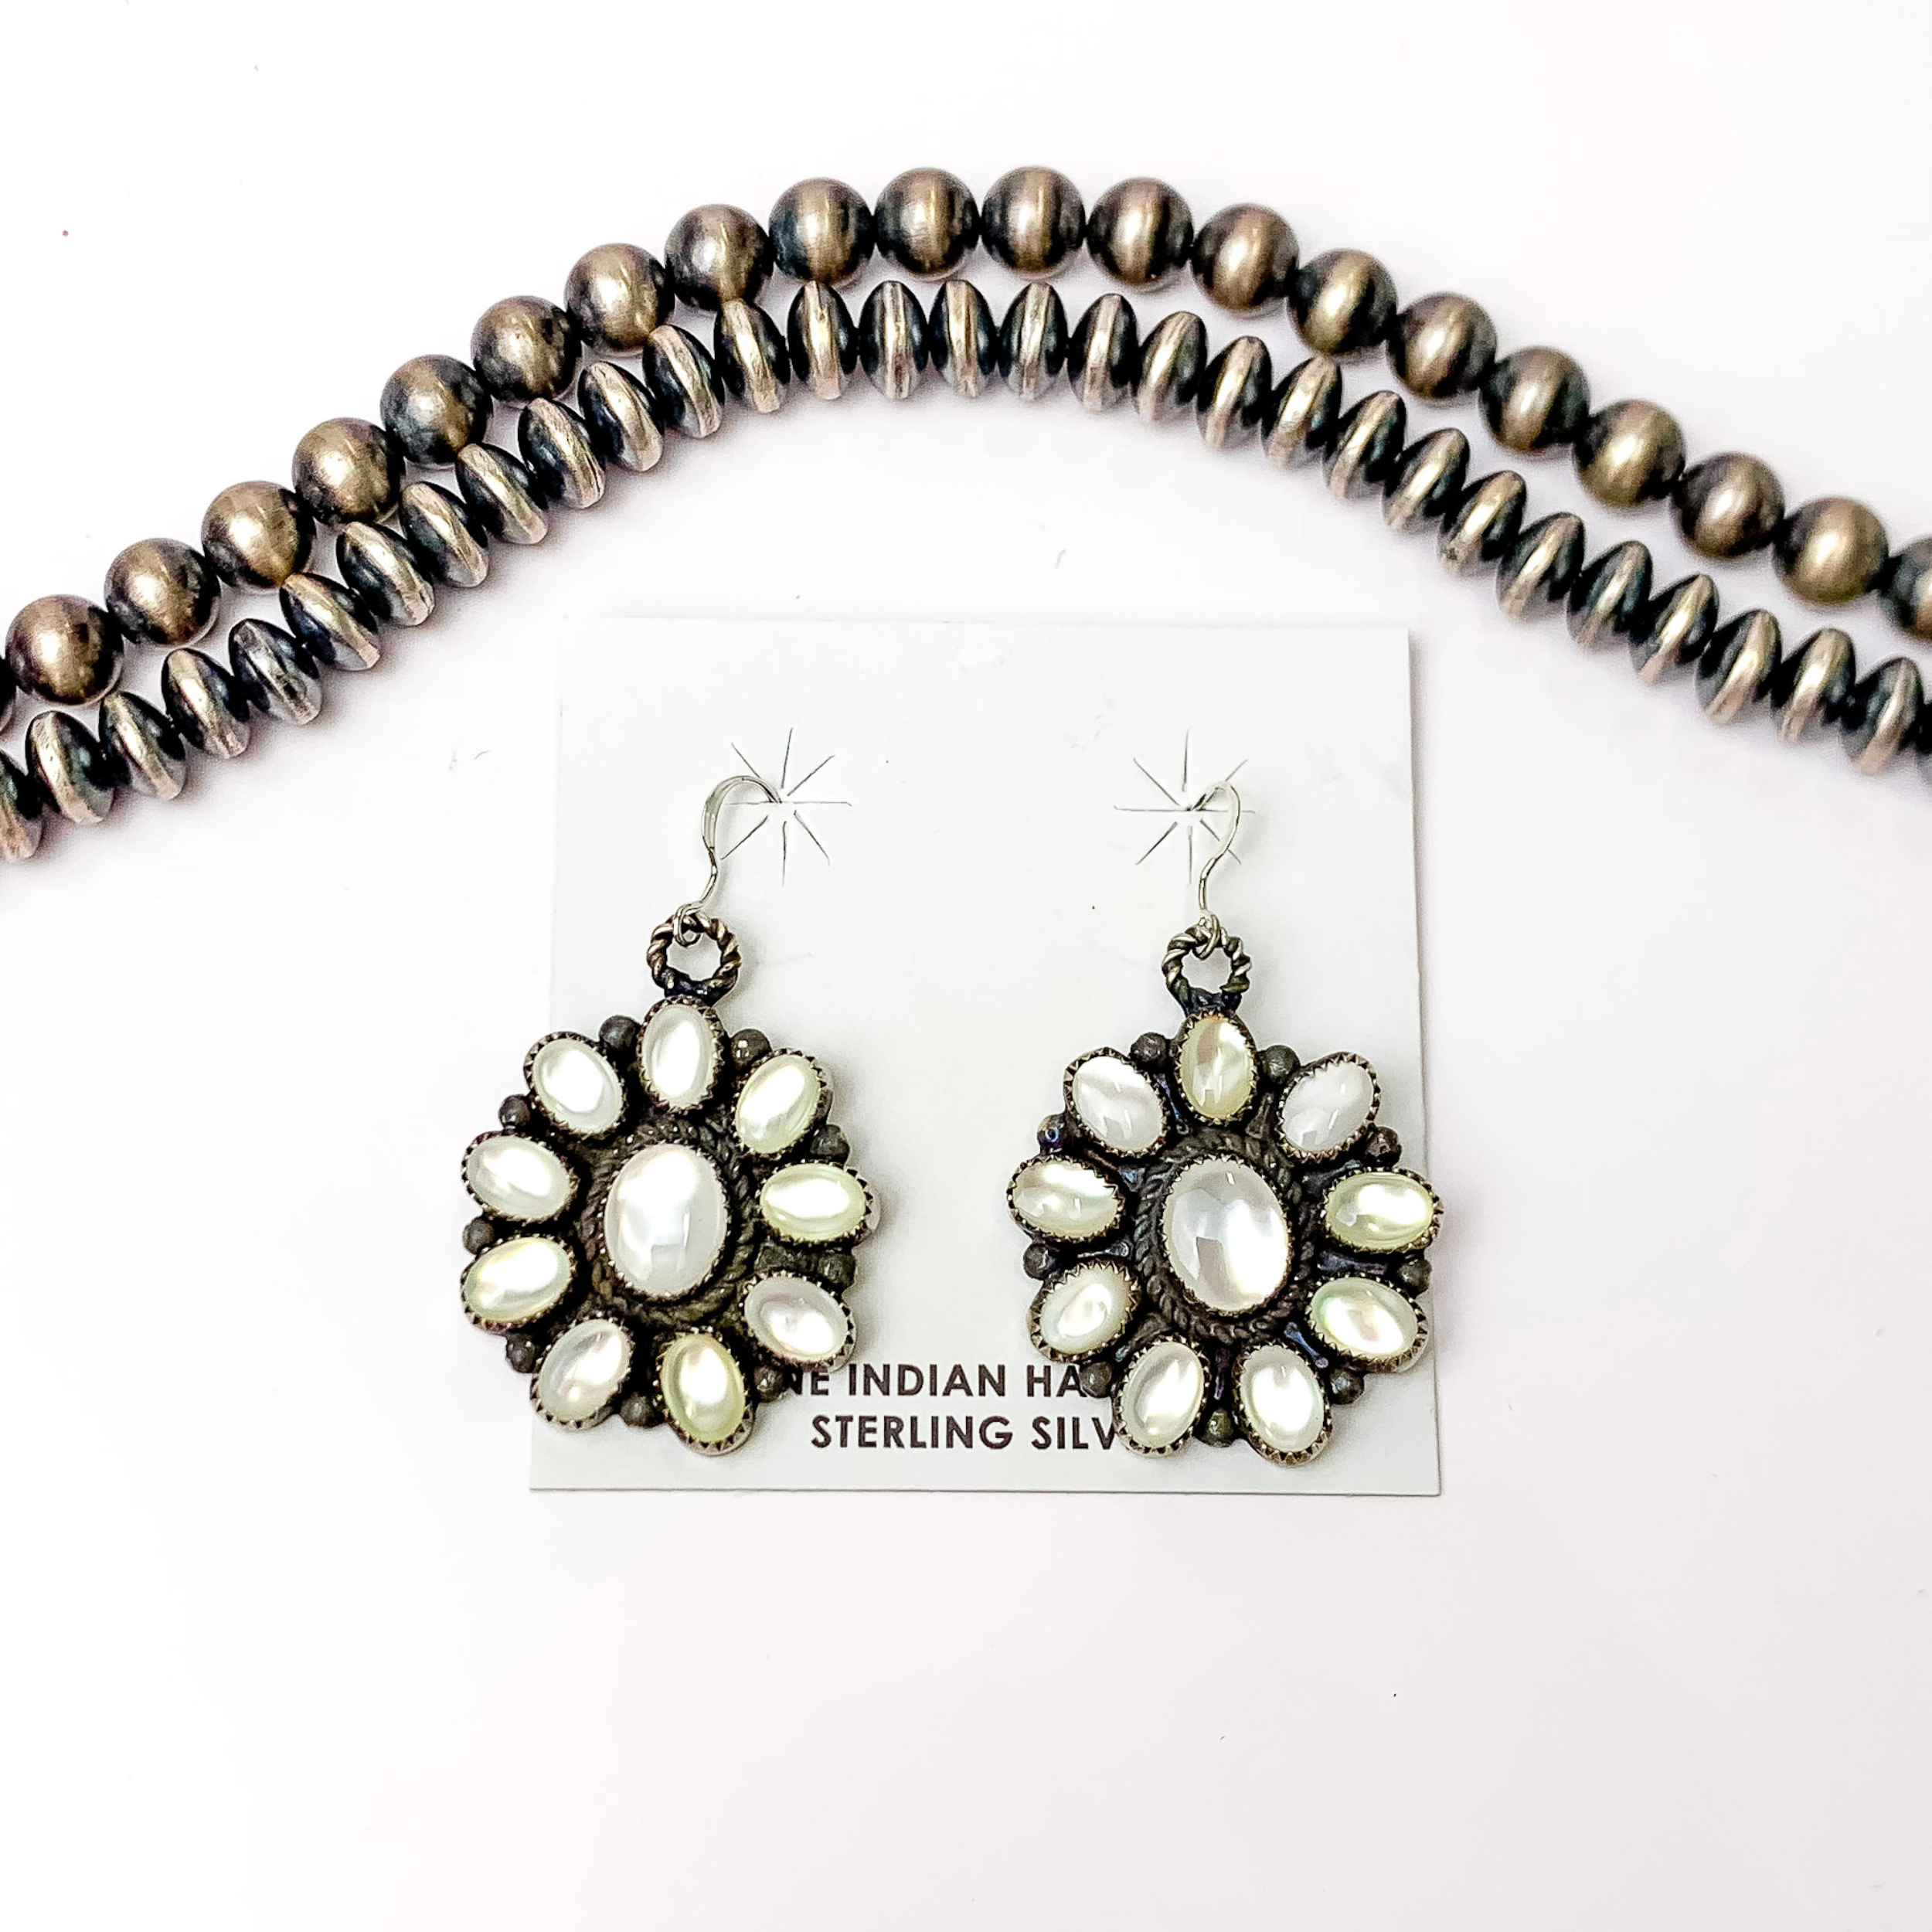 Centered in the picture are white pearl sterling silver dangling earrings with a white background. 